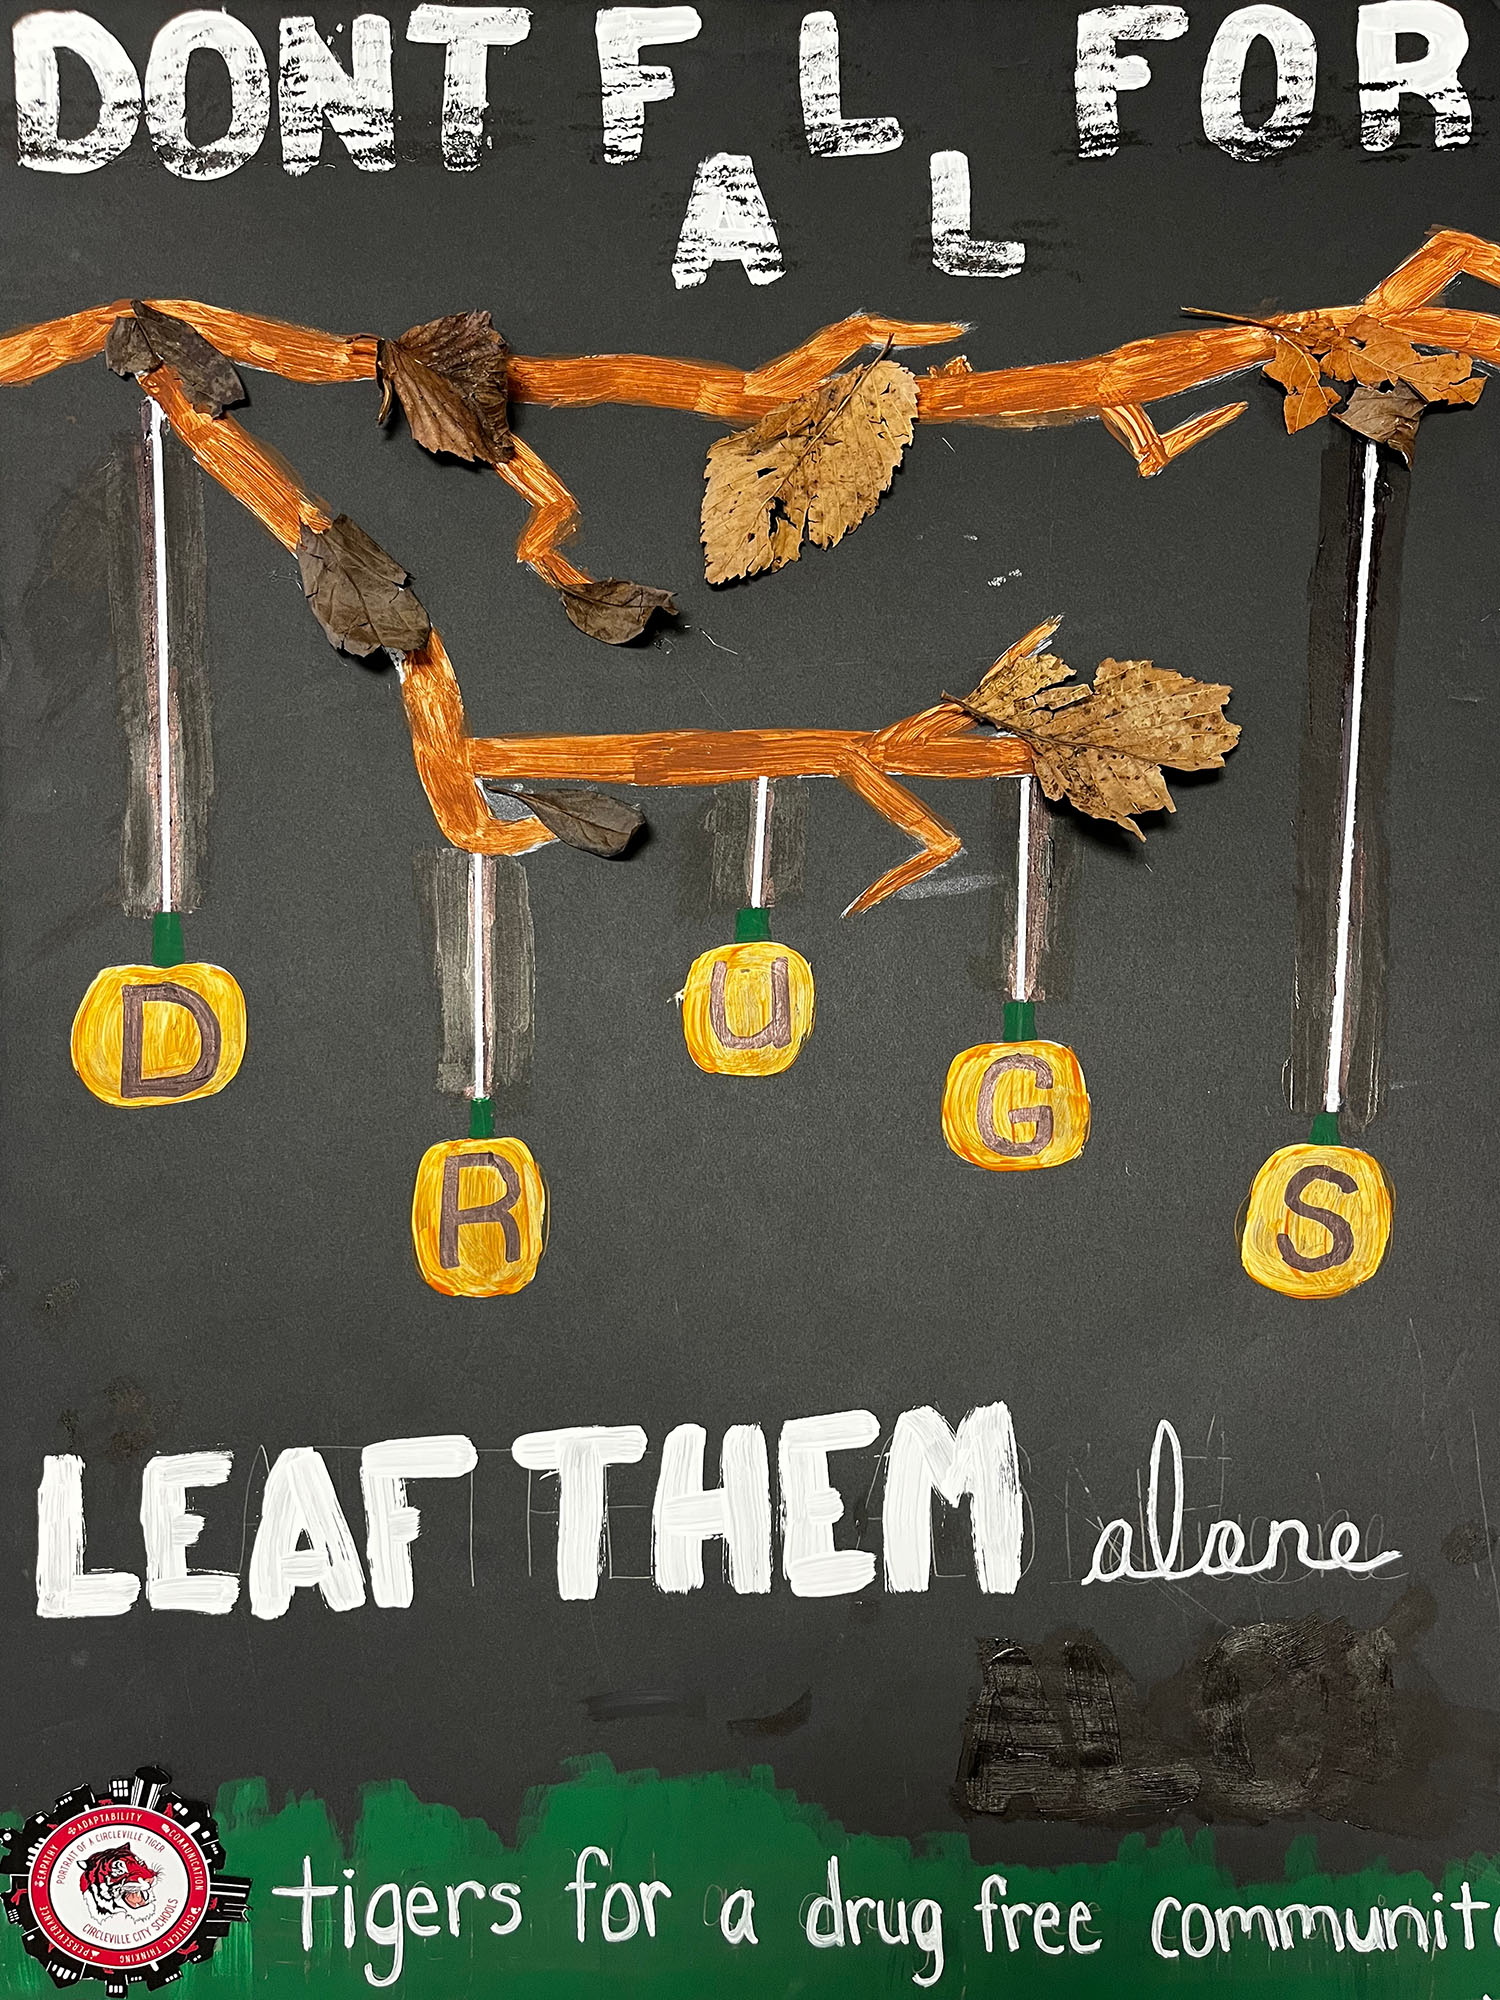 Don't Fall for Drugs - Leaf them alone. Tigers for a drug free community artwork.